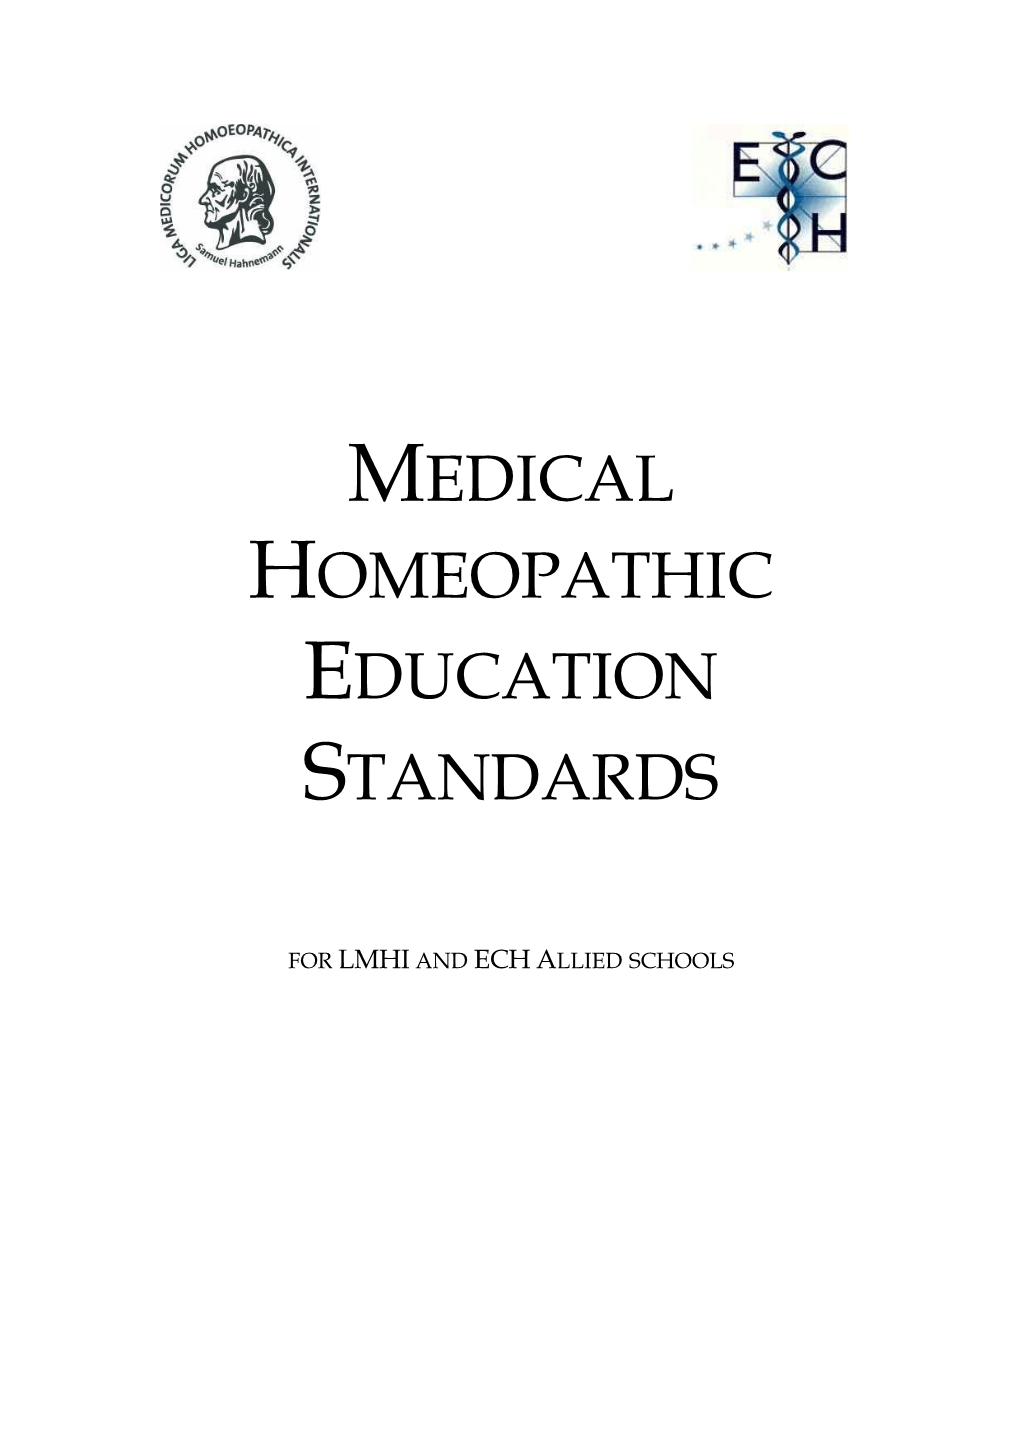 Medical Homeopathy Education Standards